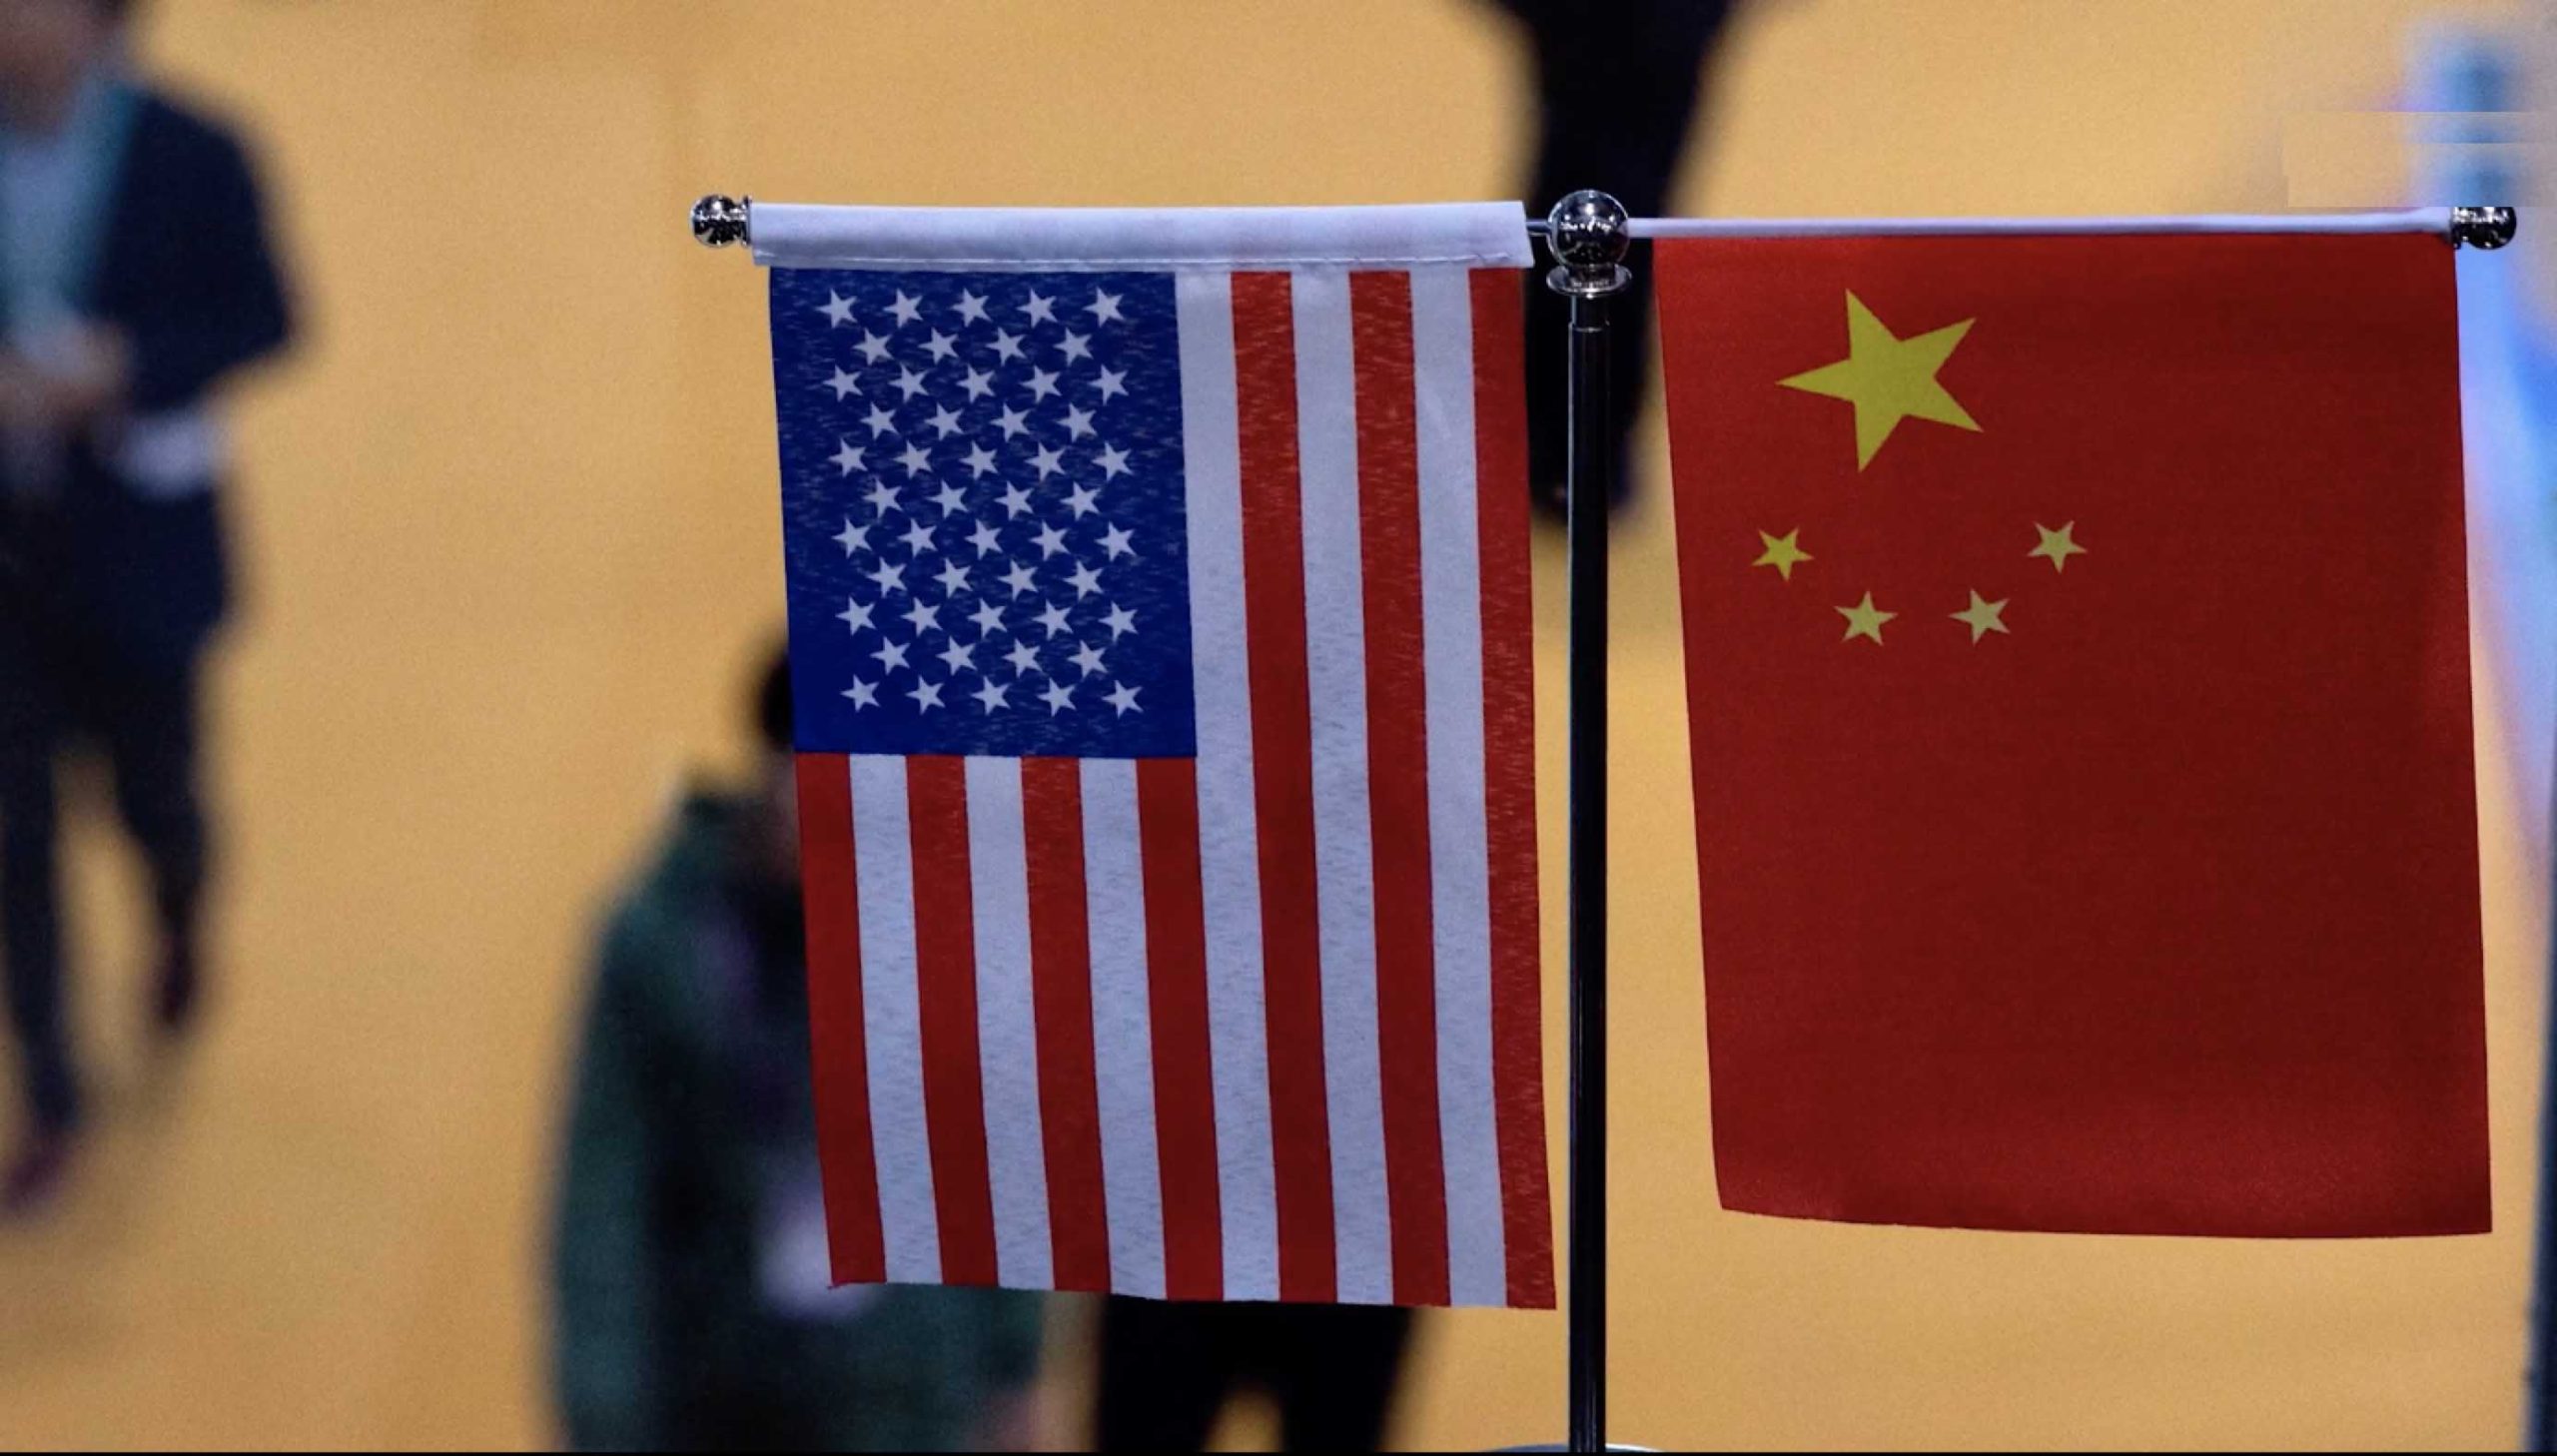 China and the US take tiny steps towards détente By Shahid Javed Burki